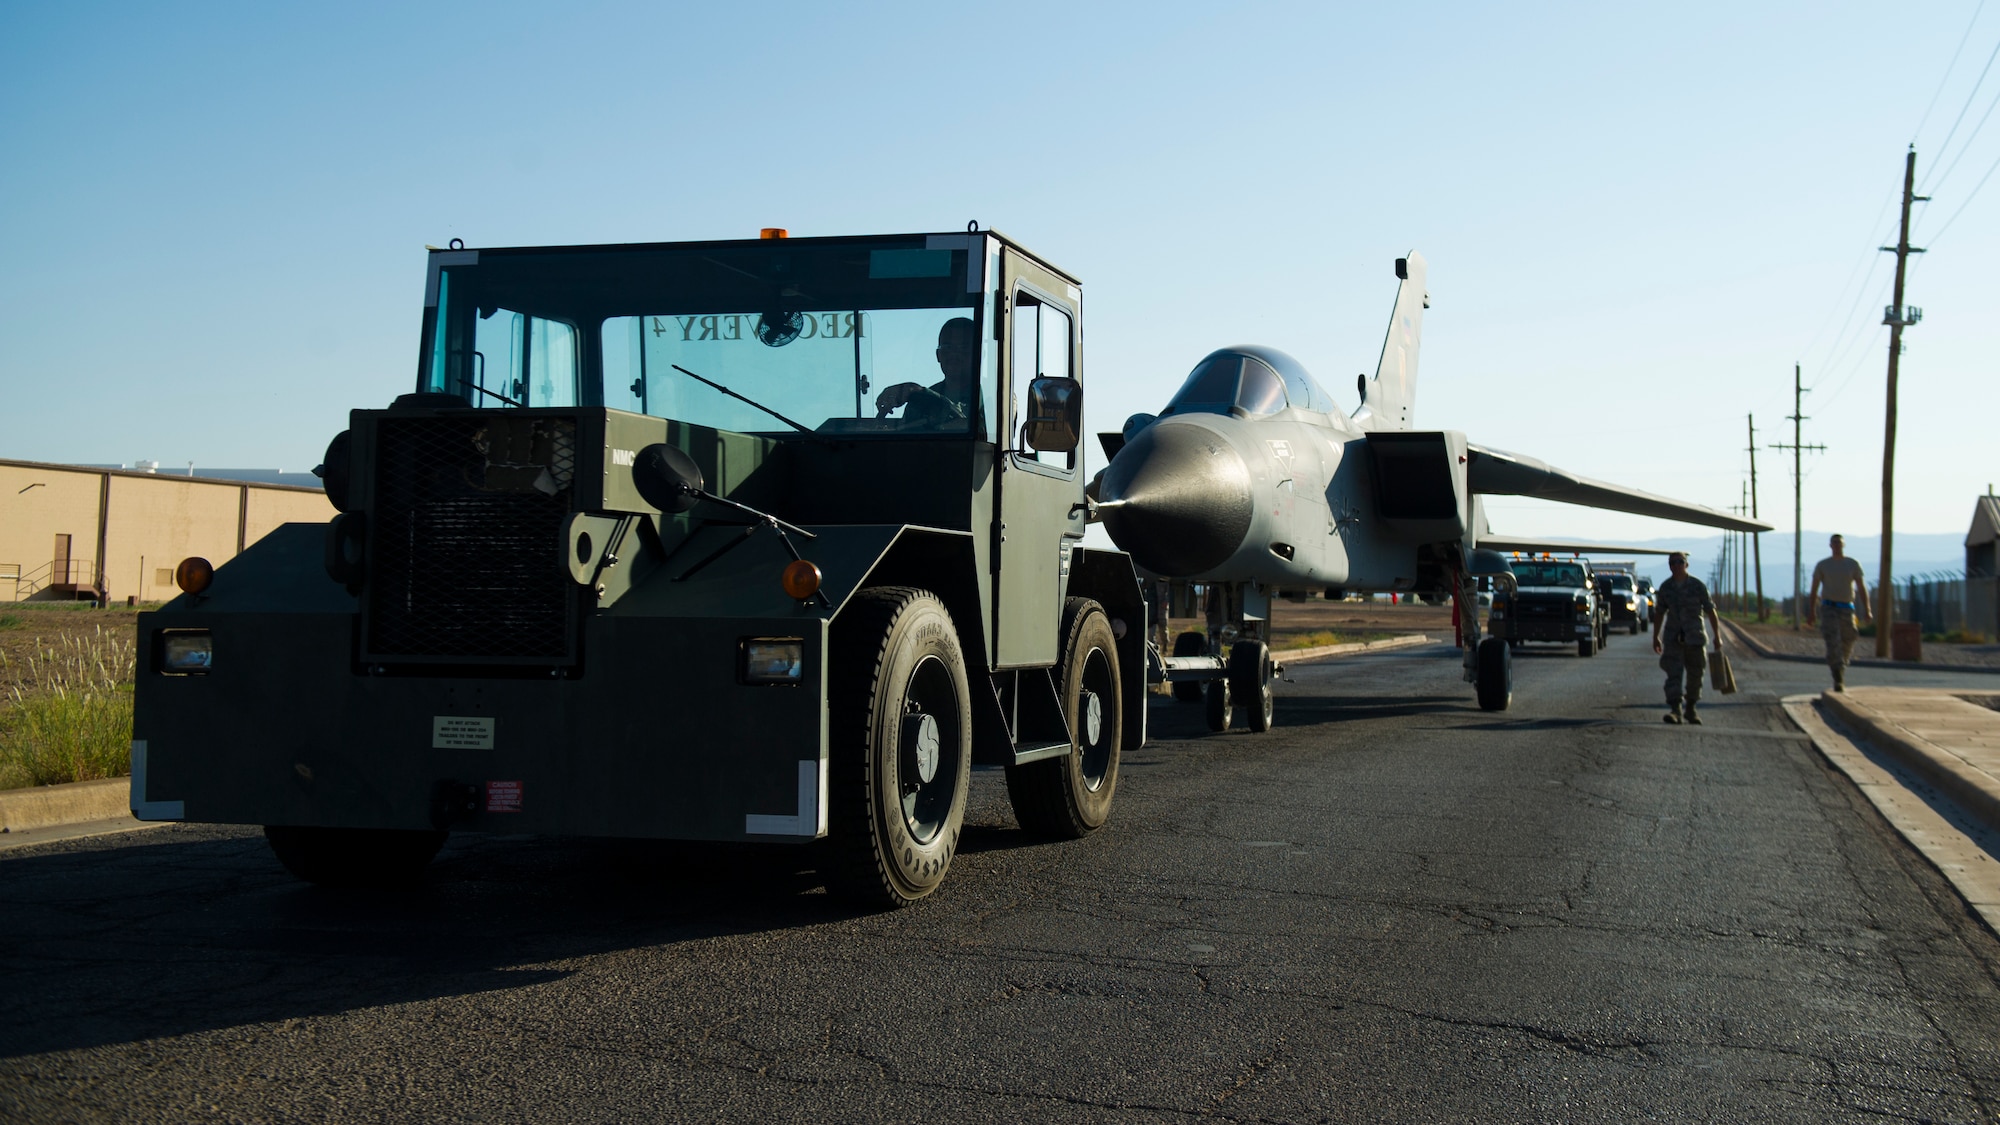 Members of the 49th Maintenance Group crash recovery team transport a German Air Force Tornado static display to Heritage Park to join other historical aircraft which have been flown at Holloman Air Force Base, N.M., July 19. History was made Sep. 19, when a German Air Force static aircraft was unveiled in Heritage Park by Lt. Gen. Martin Schellis, GAF Flying Training Center commander, and Col. Robert Kiebler, 49th Wing commander. The GAF Training Center and the Tornados are a significant part of military aviation operations in and around Holloman Air Force Base and the White Sands Missile Range. (U.S. photo by Airman 1st Class Aaron Montoya / Released)